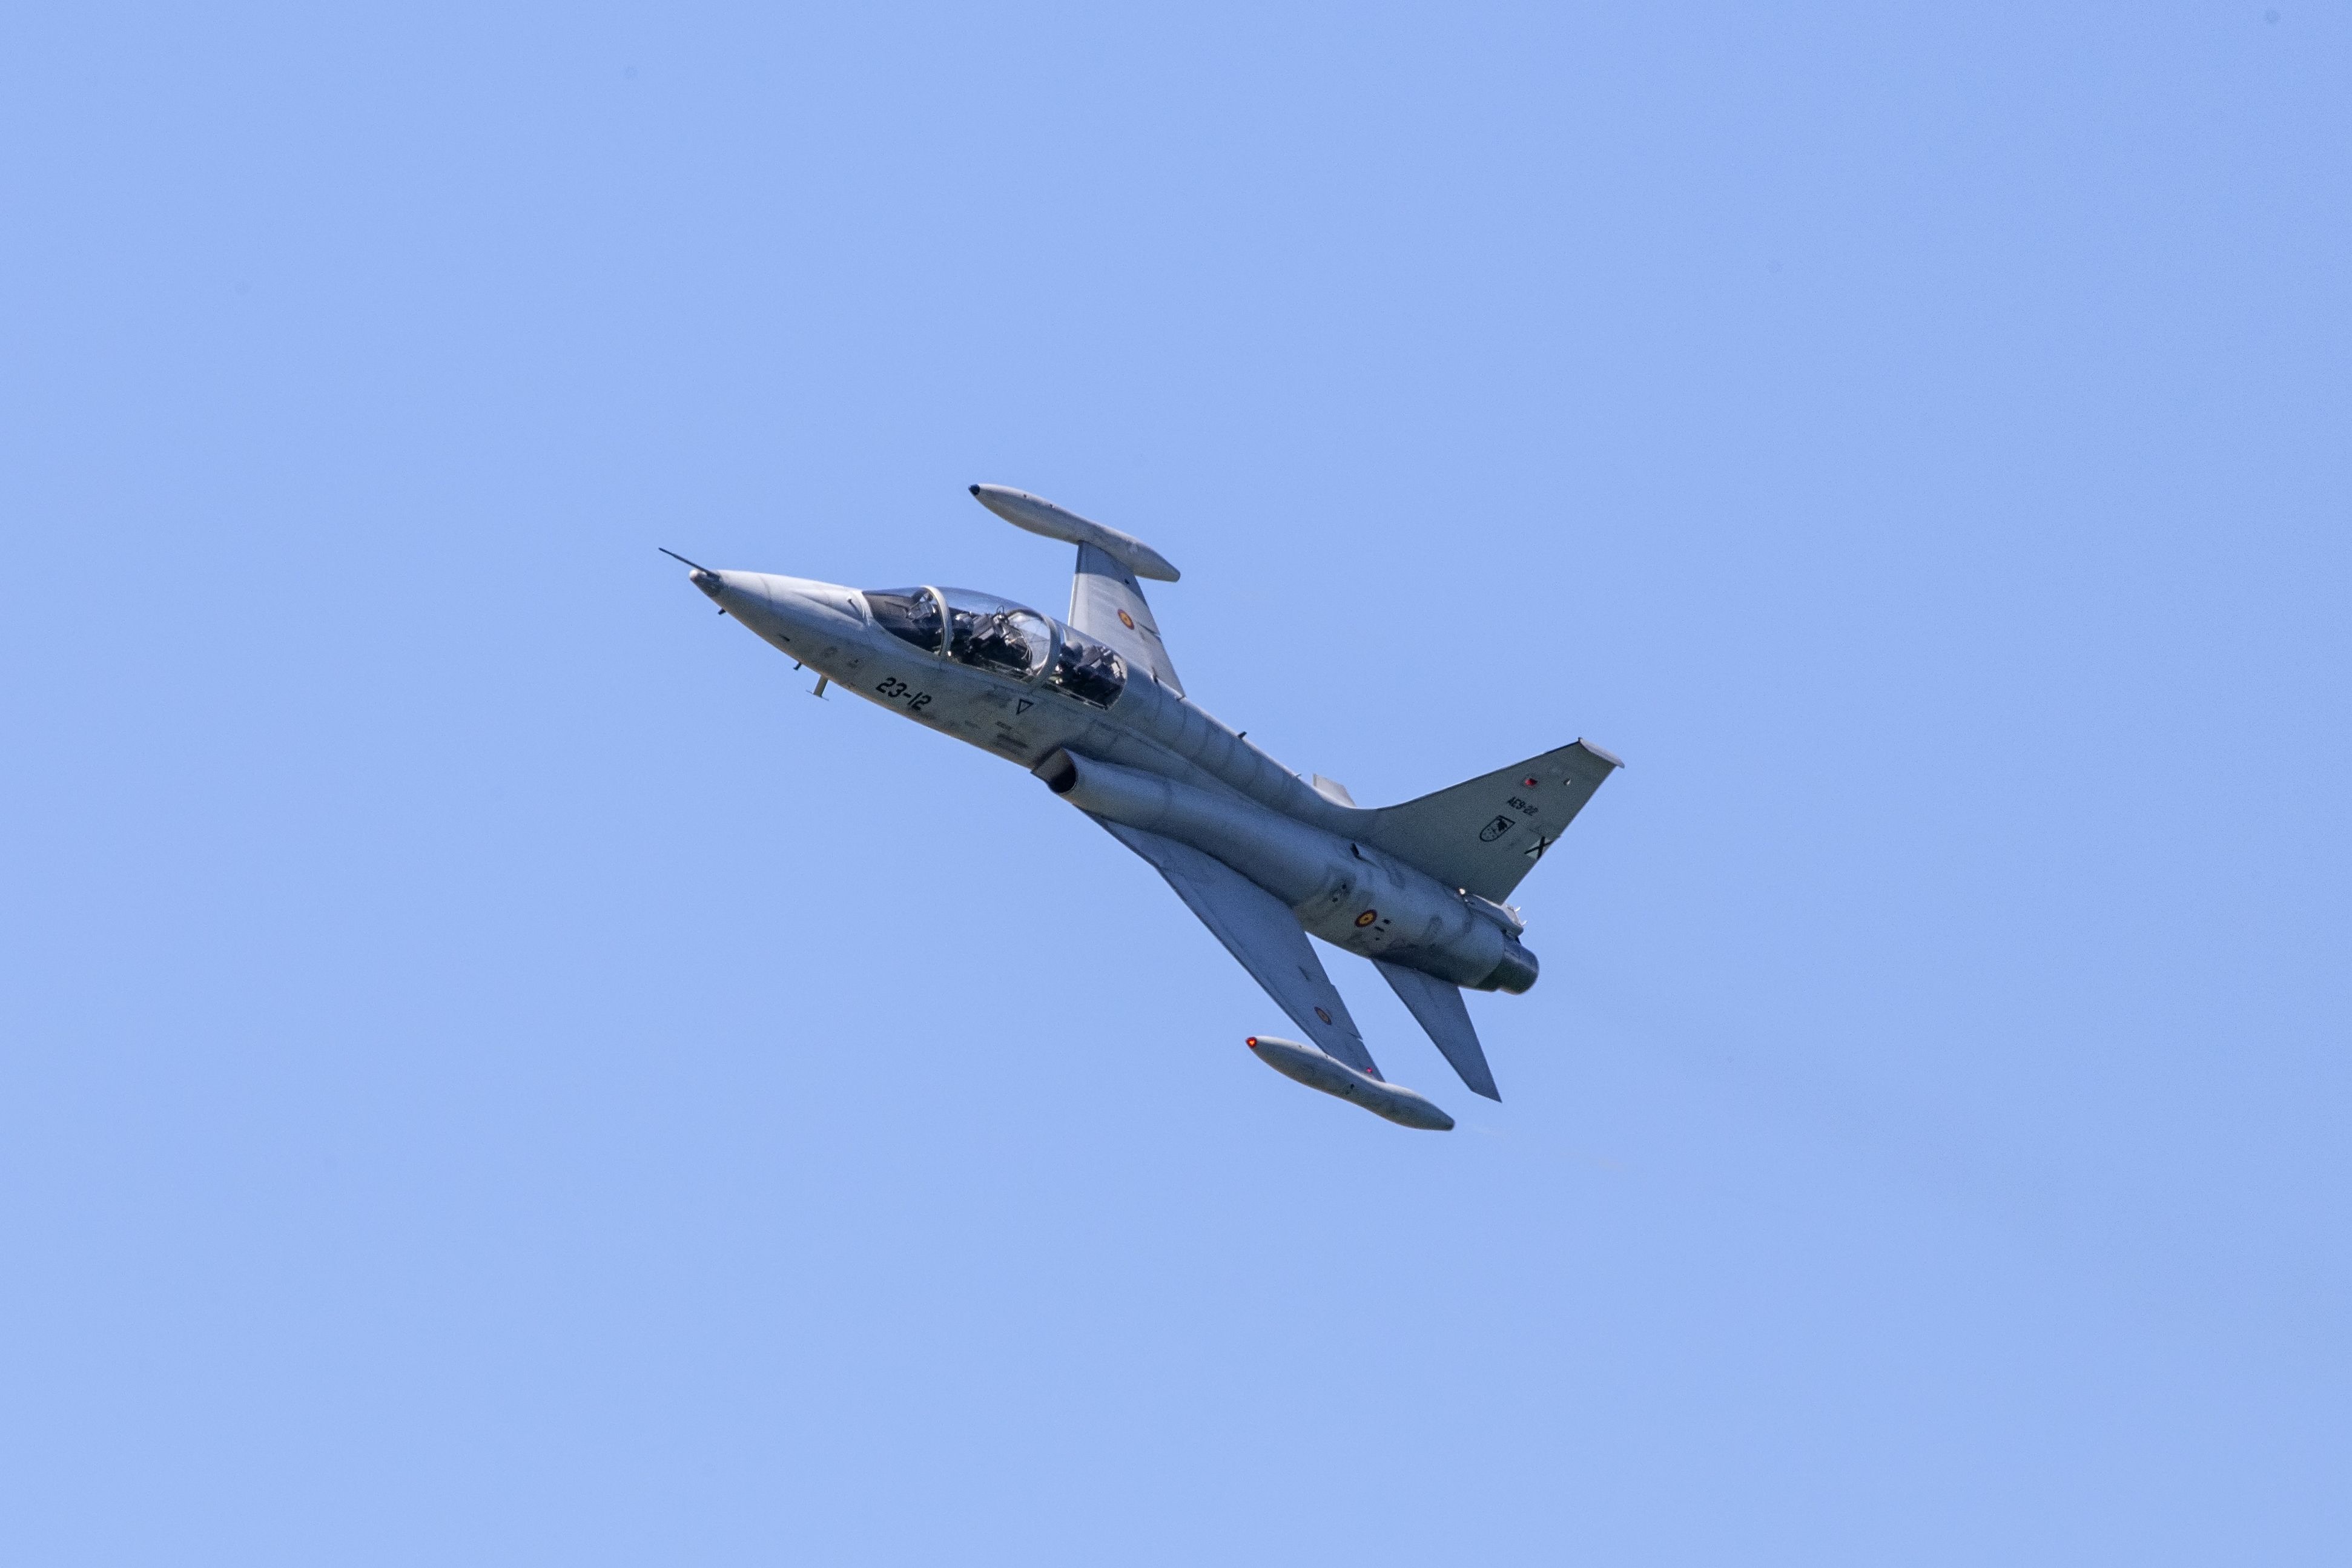 A Northrop F-5 flying in the sky.